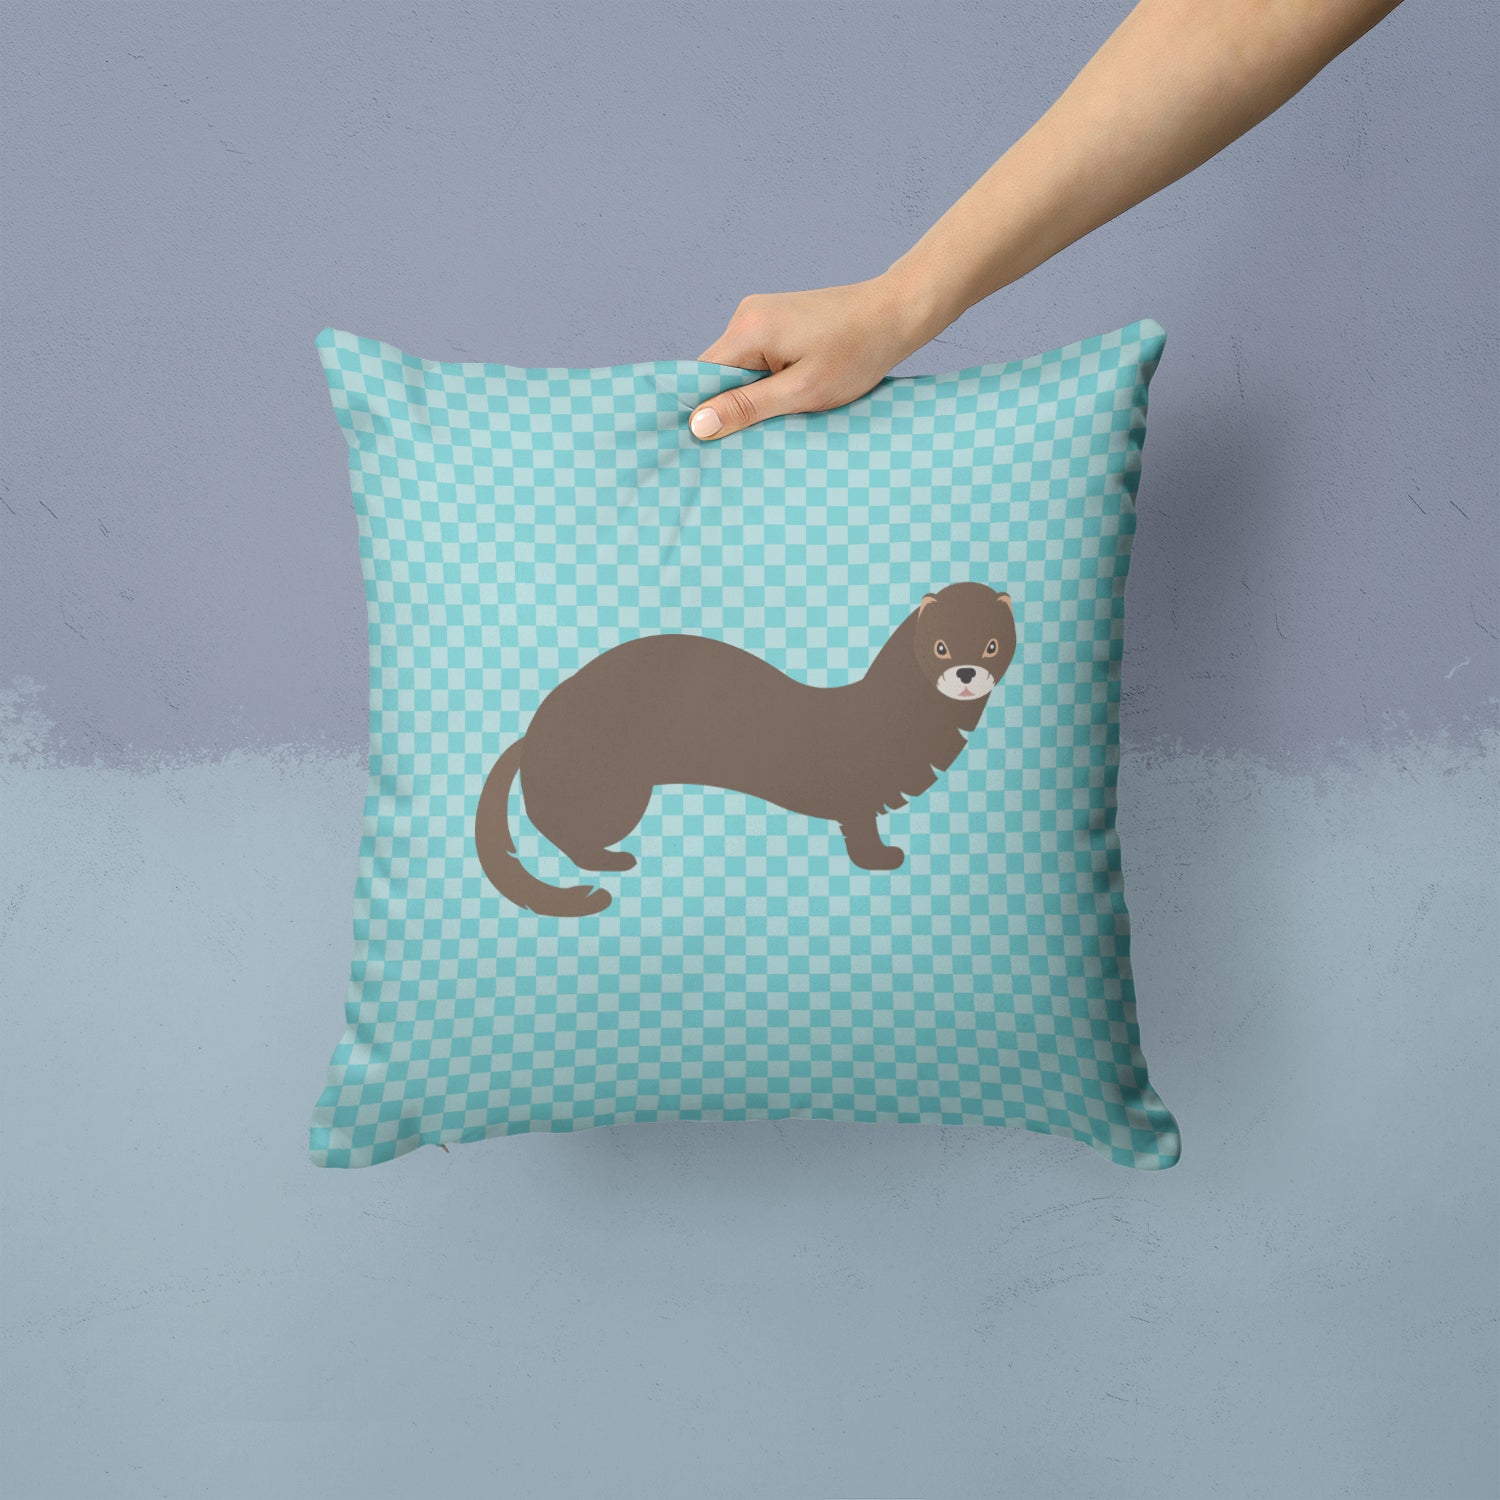 Russian or European Mink Blue Check Fabric Decorative Pillow BB8042PW1414 - the-store.com